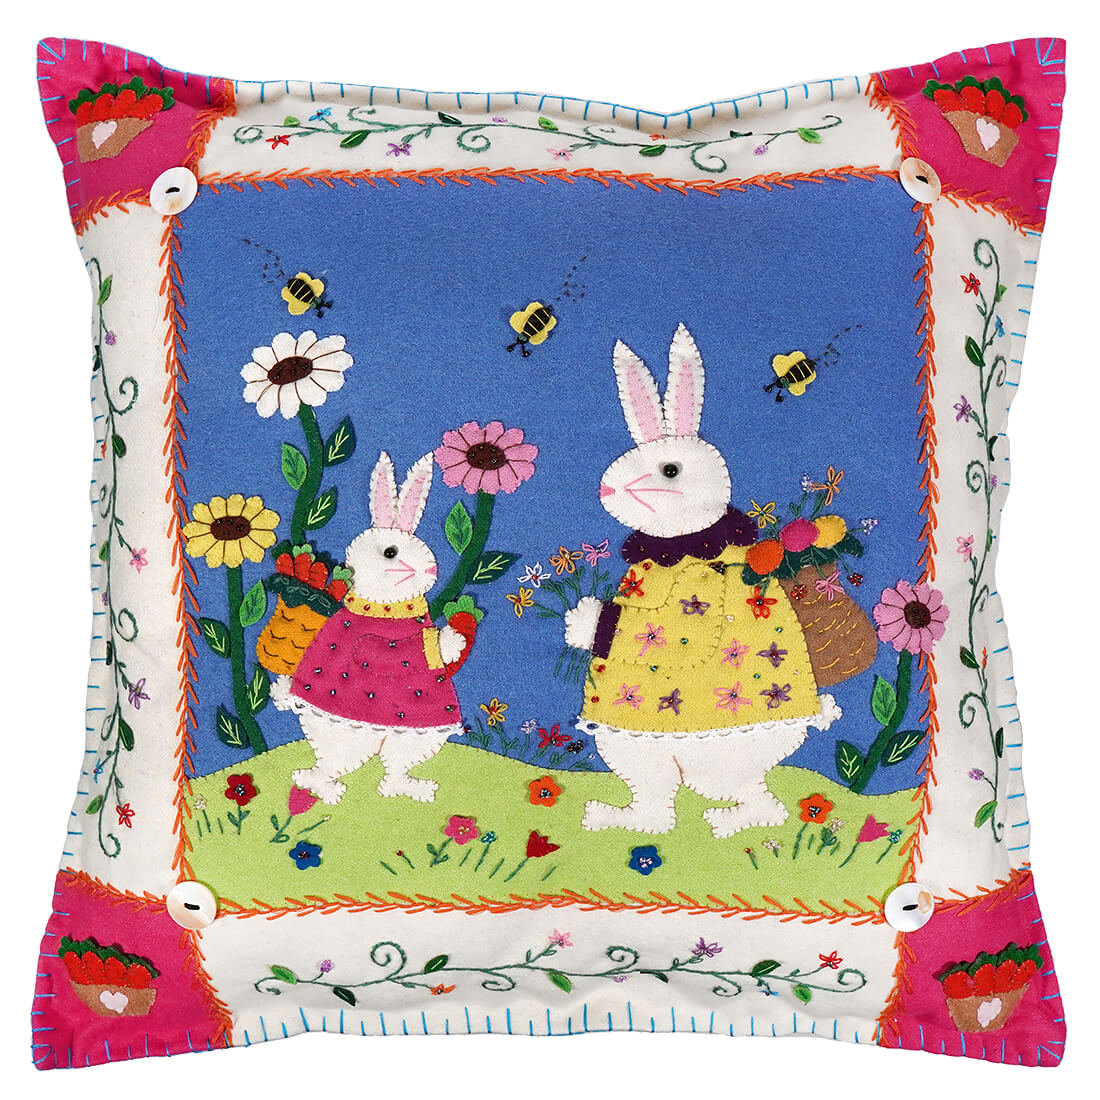 White-Edged Blue Pillow With Rabbits